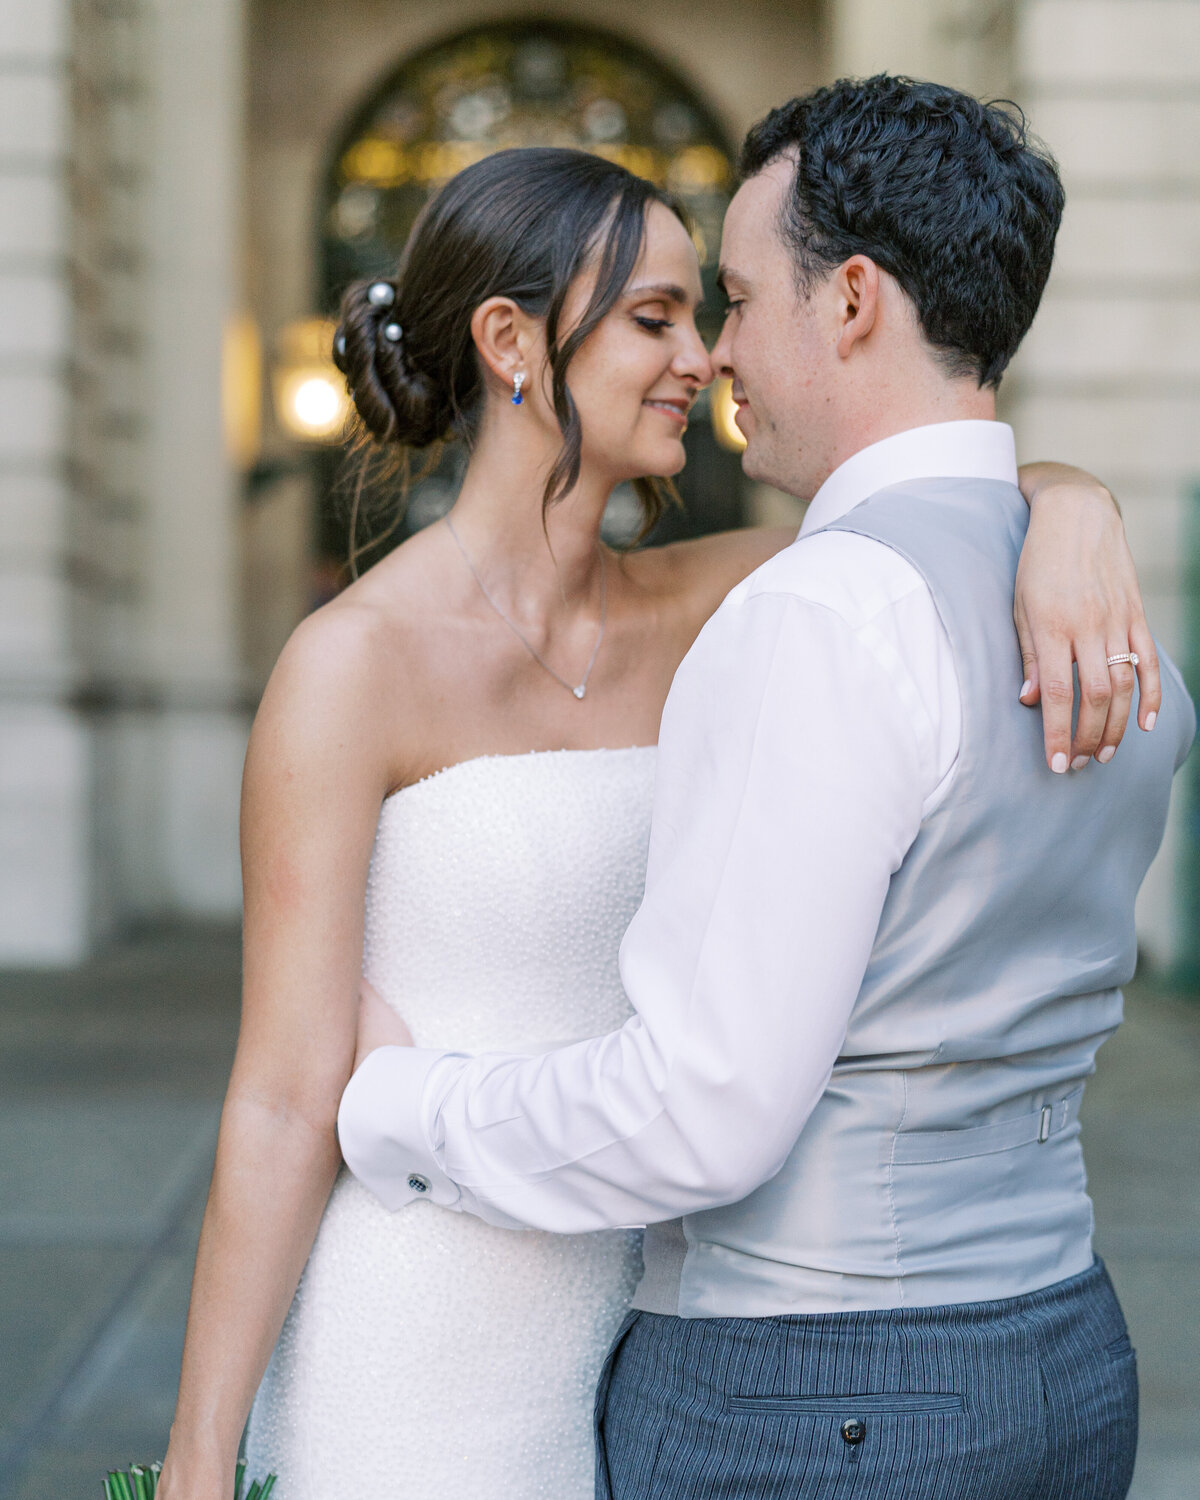 Couples wedding portraits at The Royal Exchange wedding venue in London